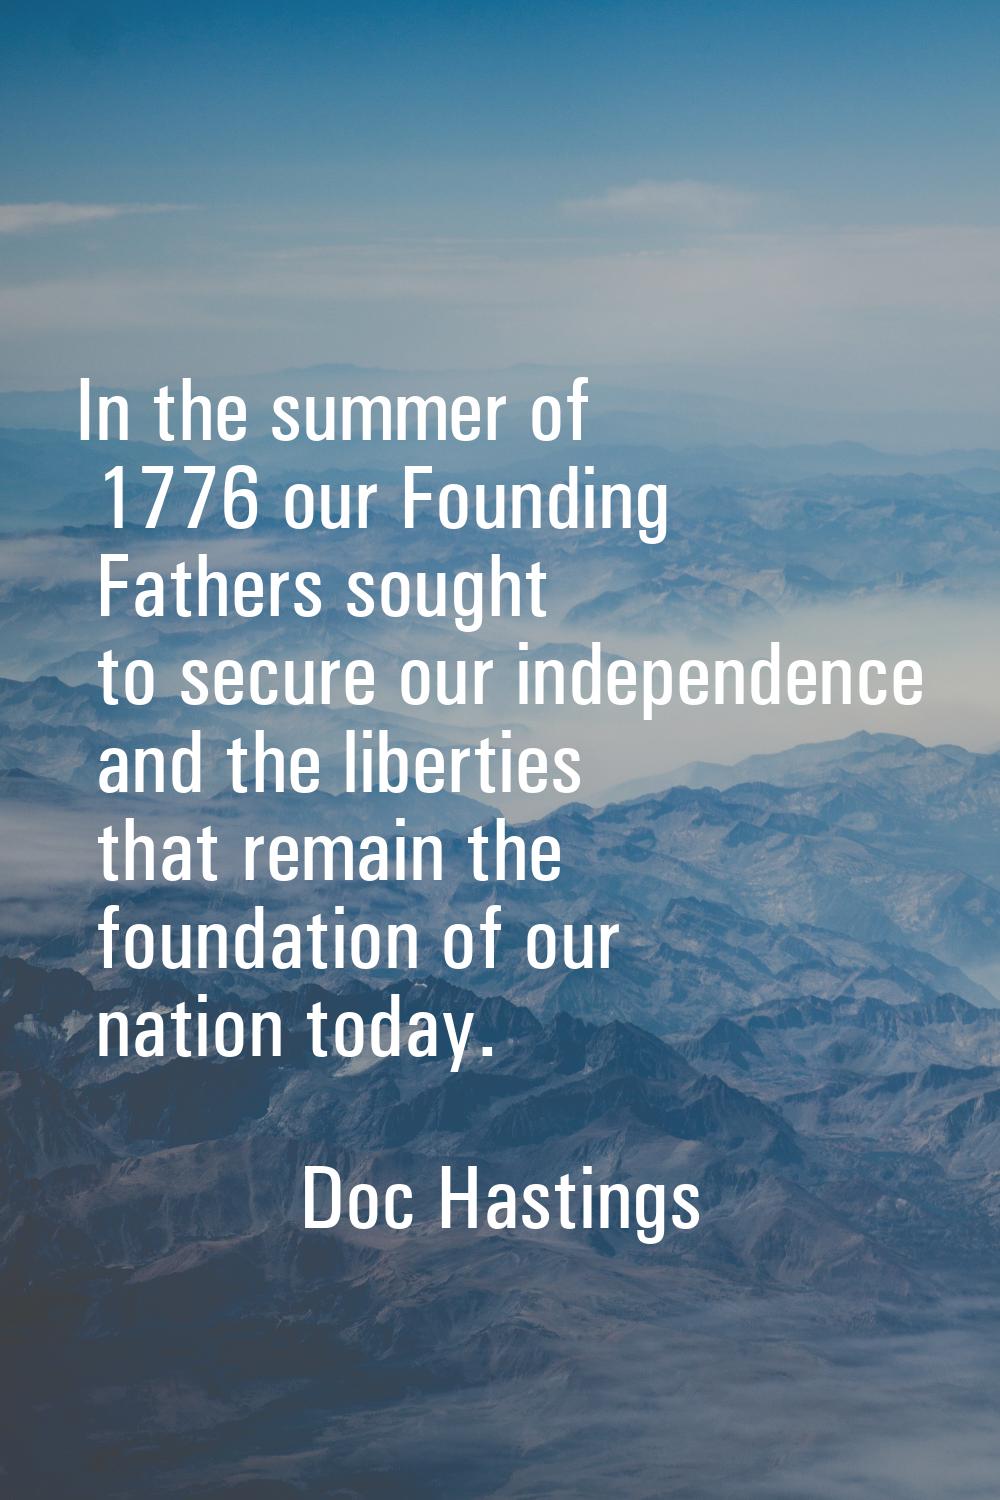 In the summer of 1776 our Founding Fathers sought to secure our independence and the liberties that